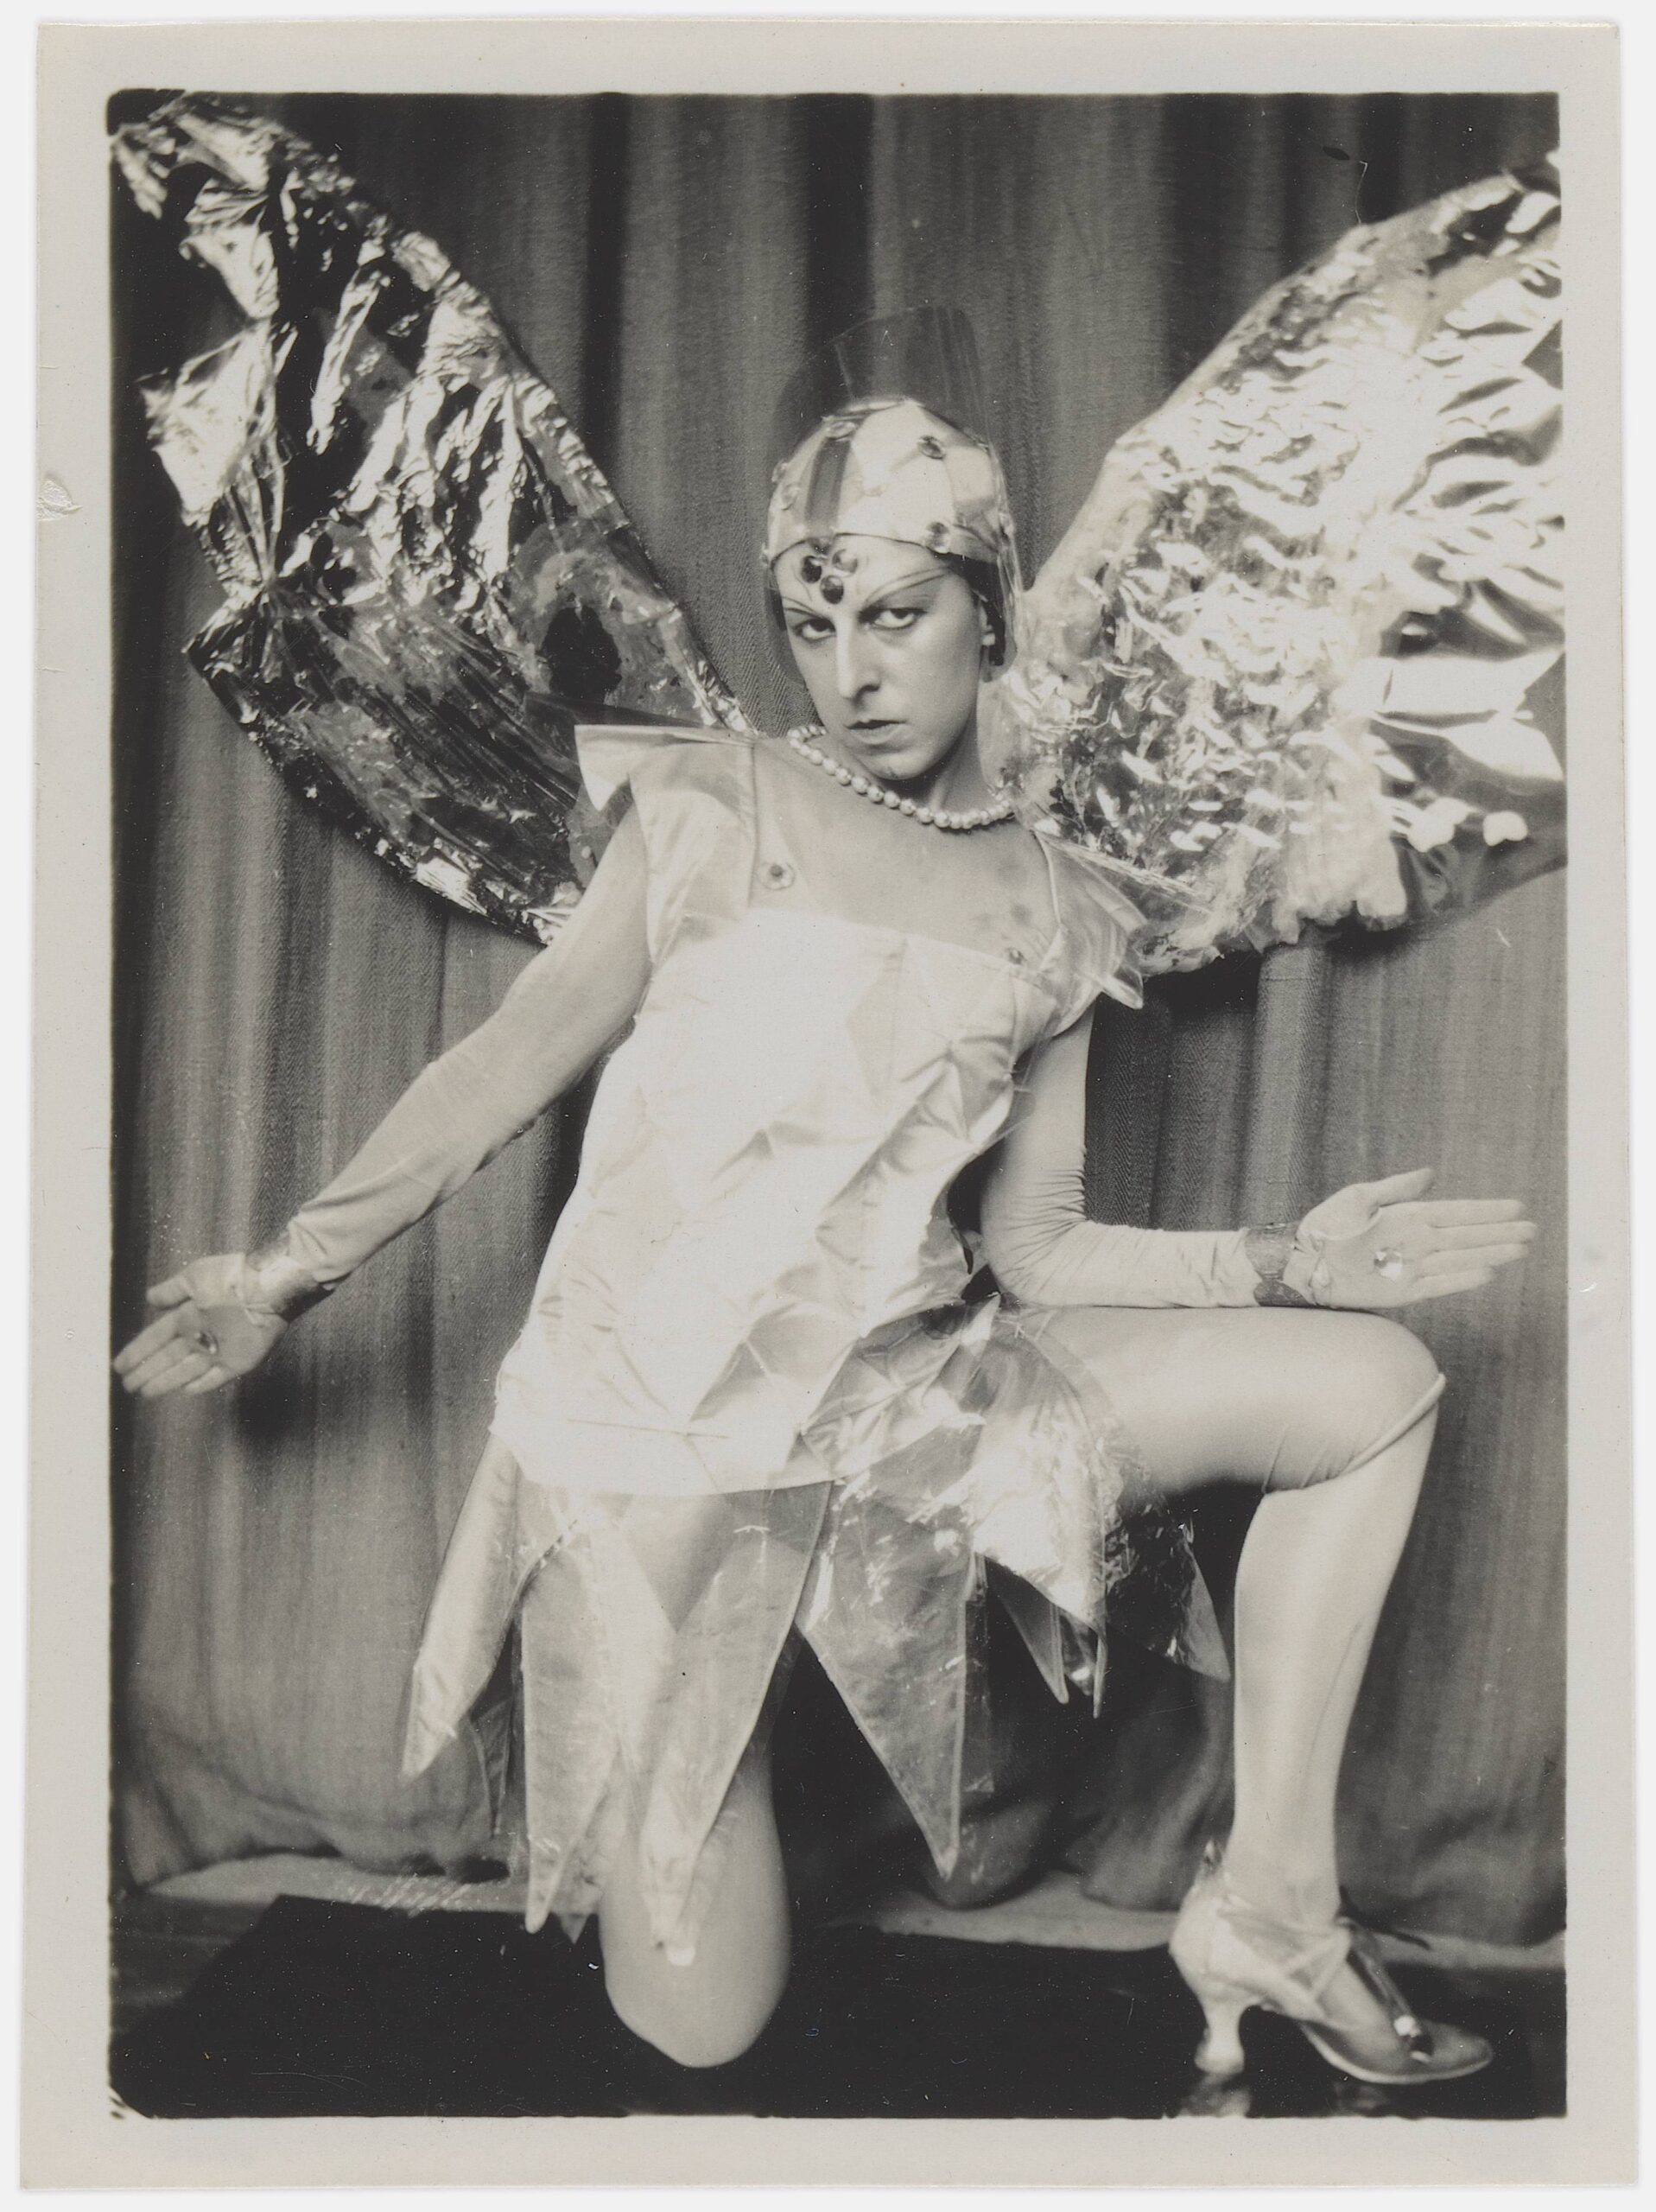 Claude Cahun (Lucy Schwob) and Marcel Moore (Suzanne Malherbe